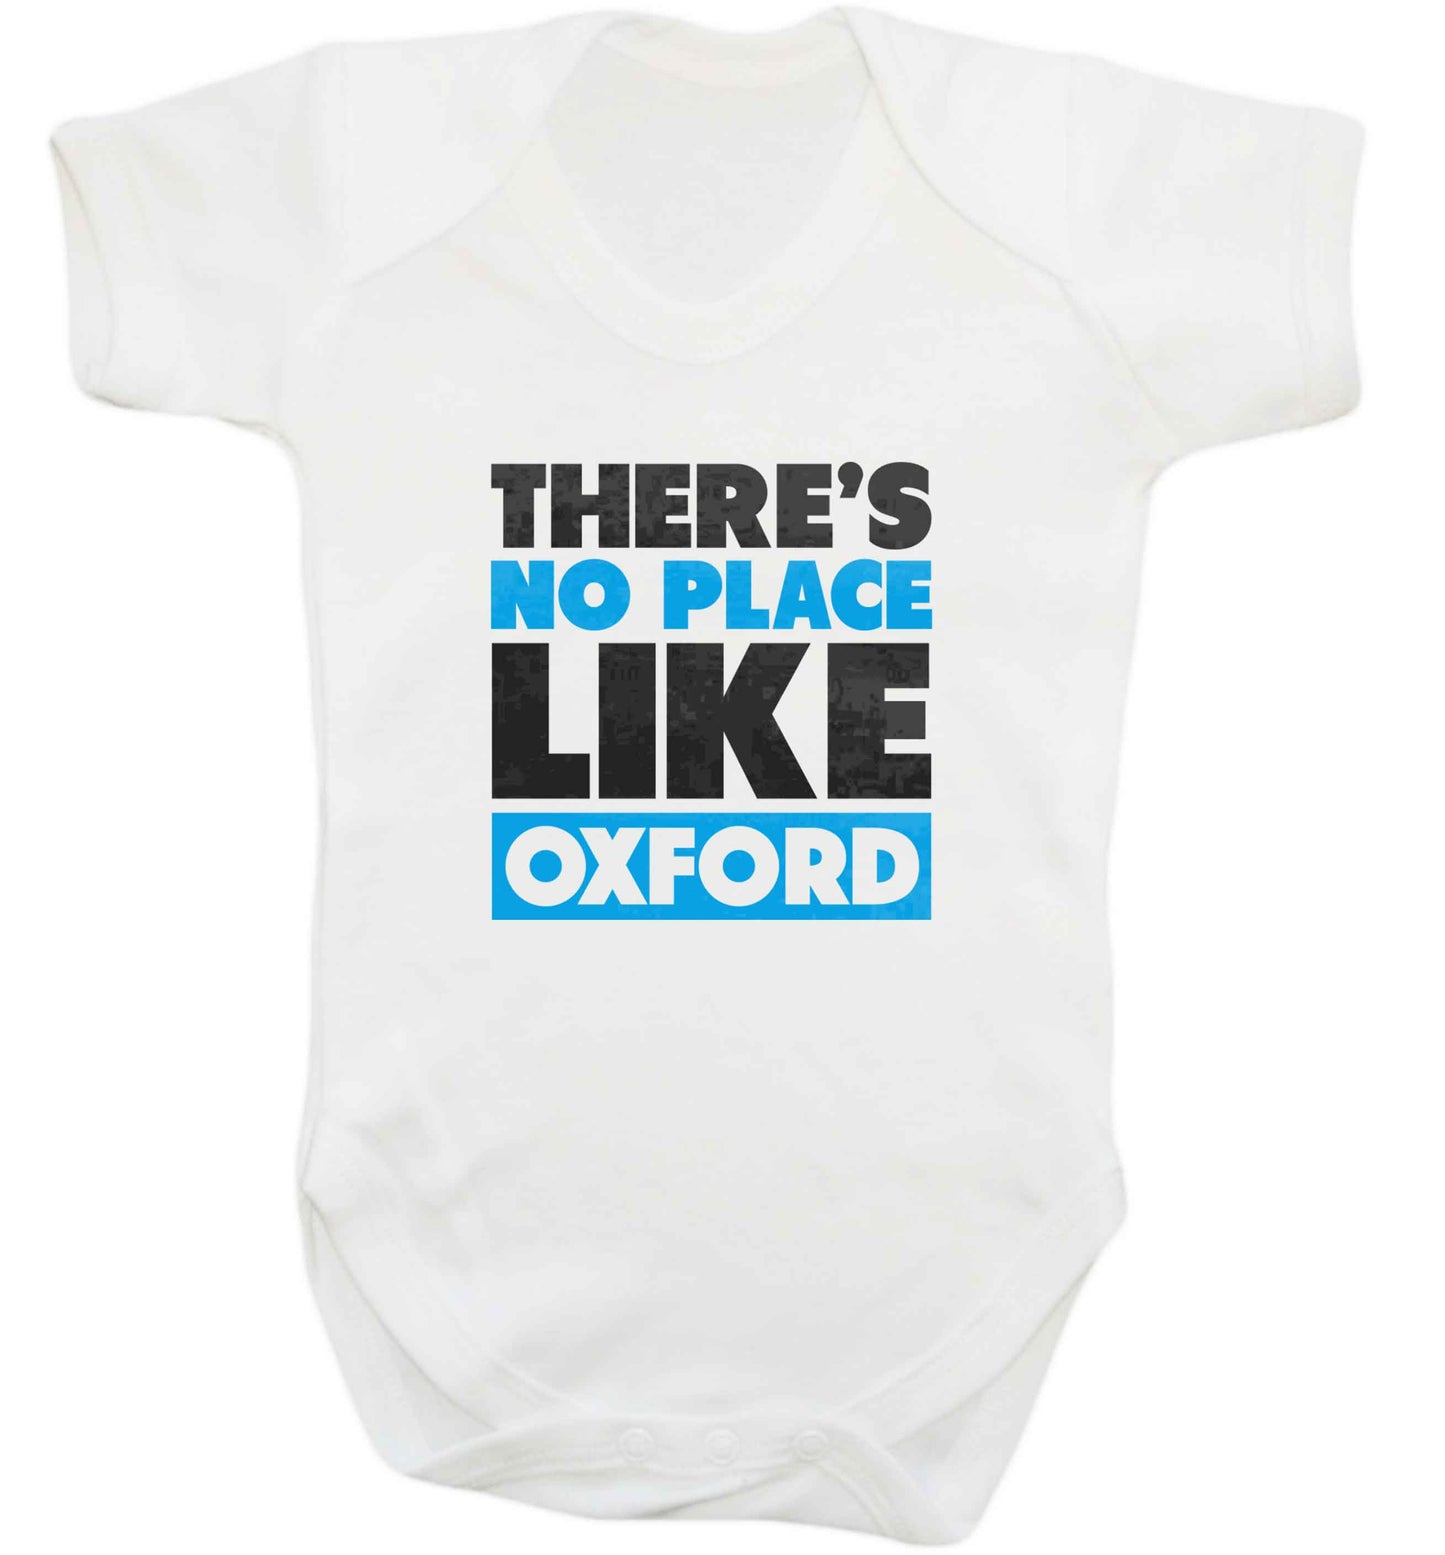 There's no place like Oxford baby vest white 18-24 months